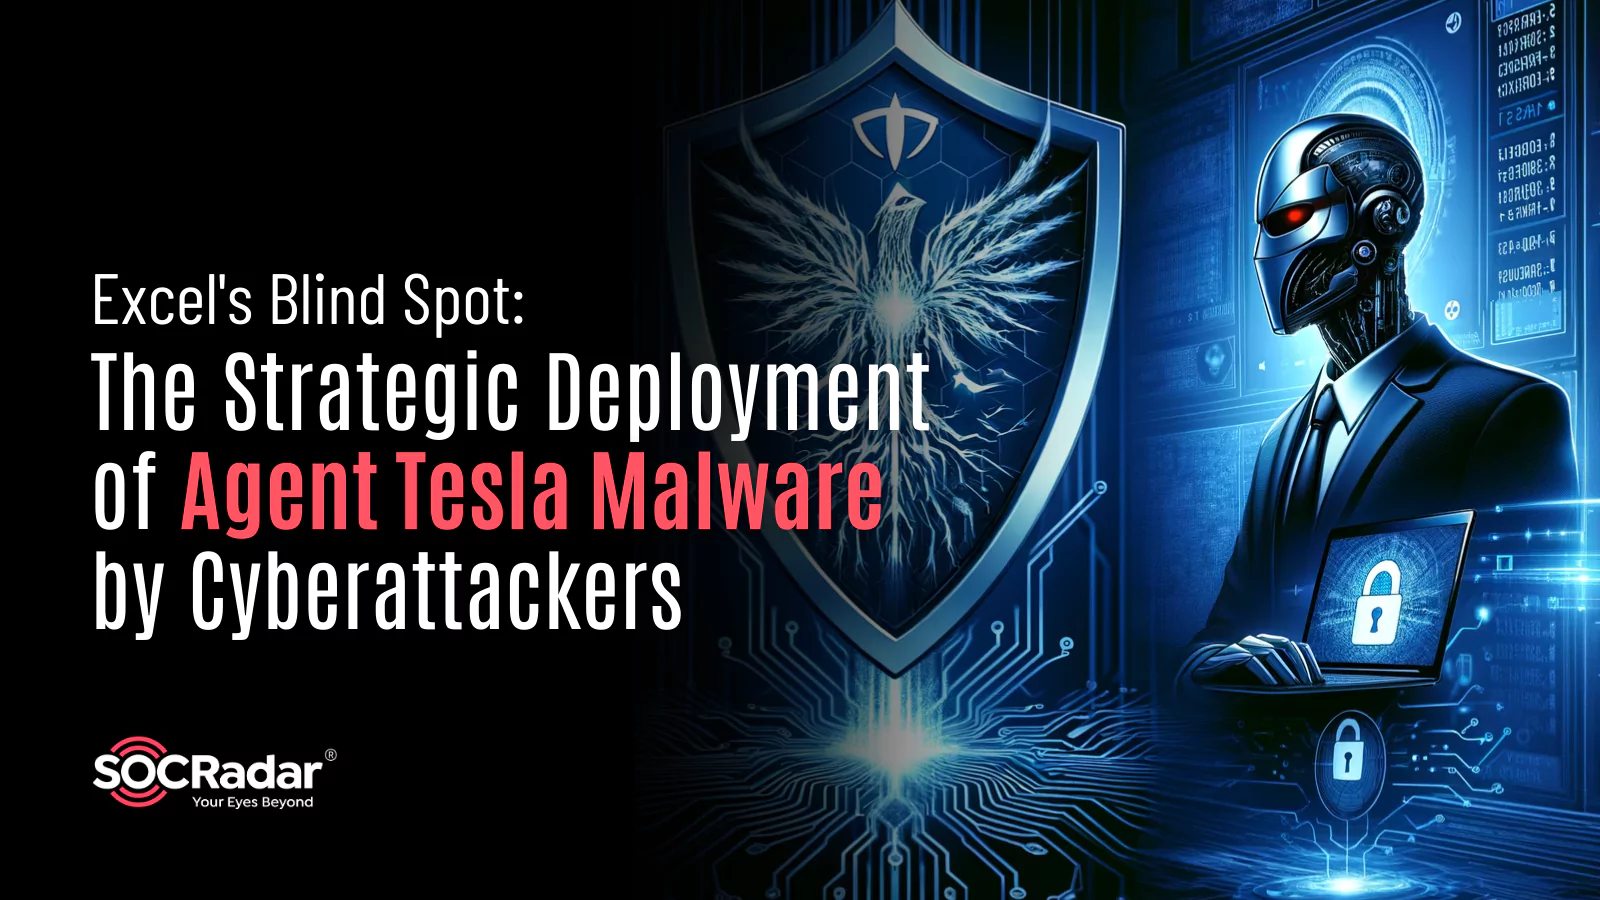 SOCRadar® Cyber Intelligence Inc. | Excel’s Blind Spot: The Strategic Deployment of Agent Tesla Malware by Cyberattackers